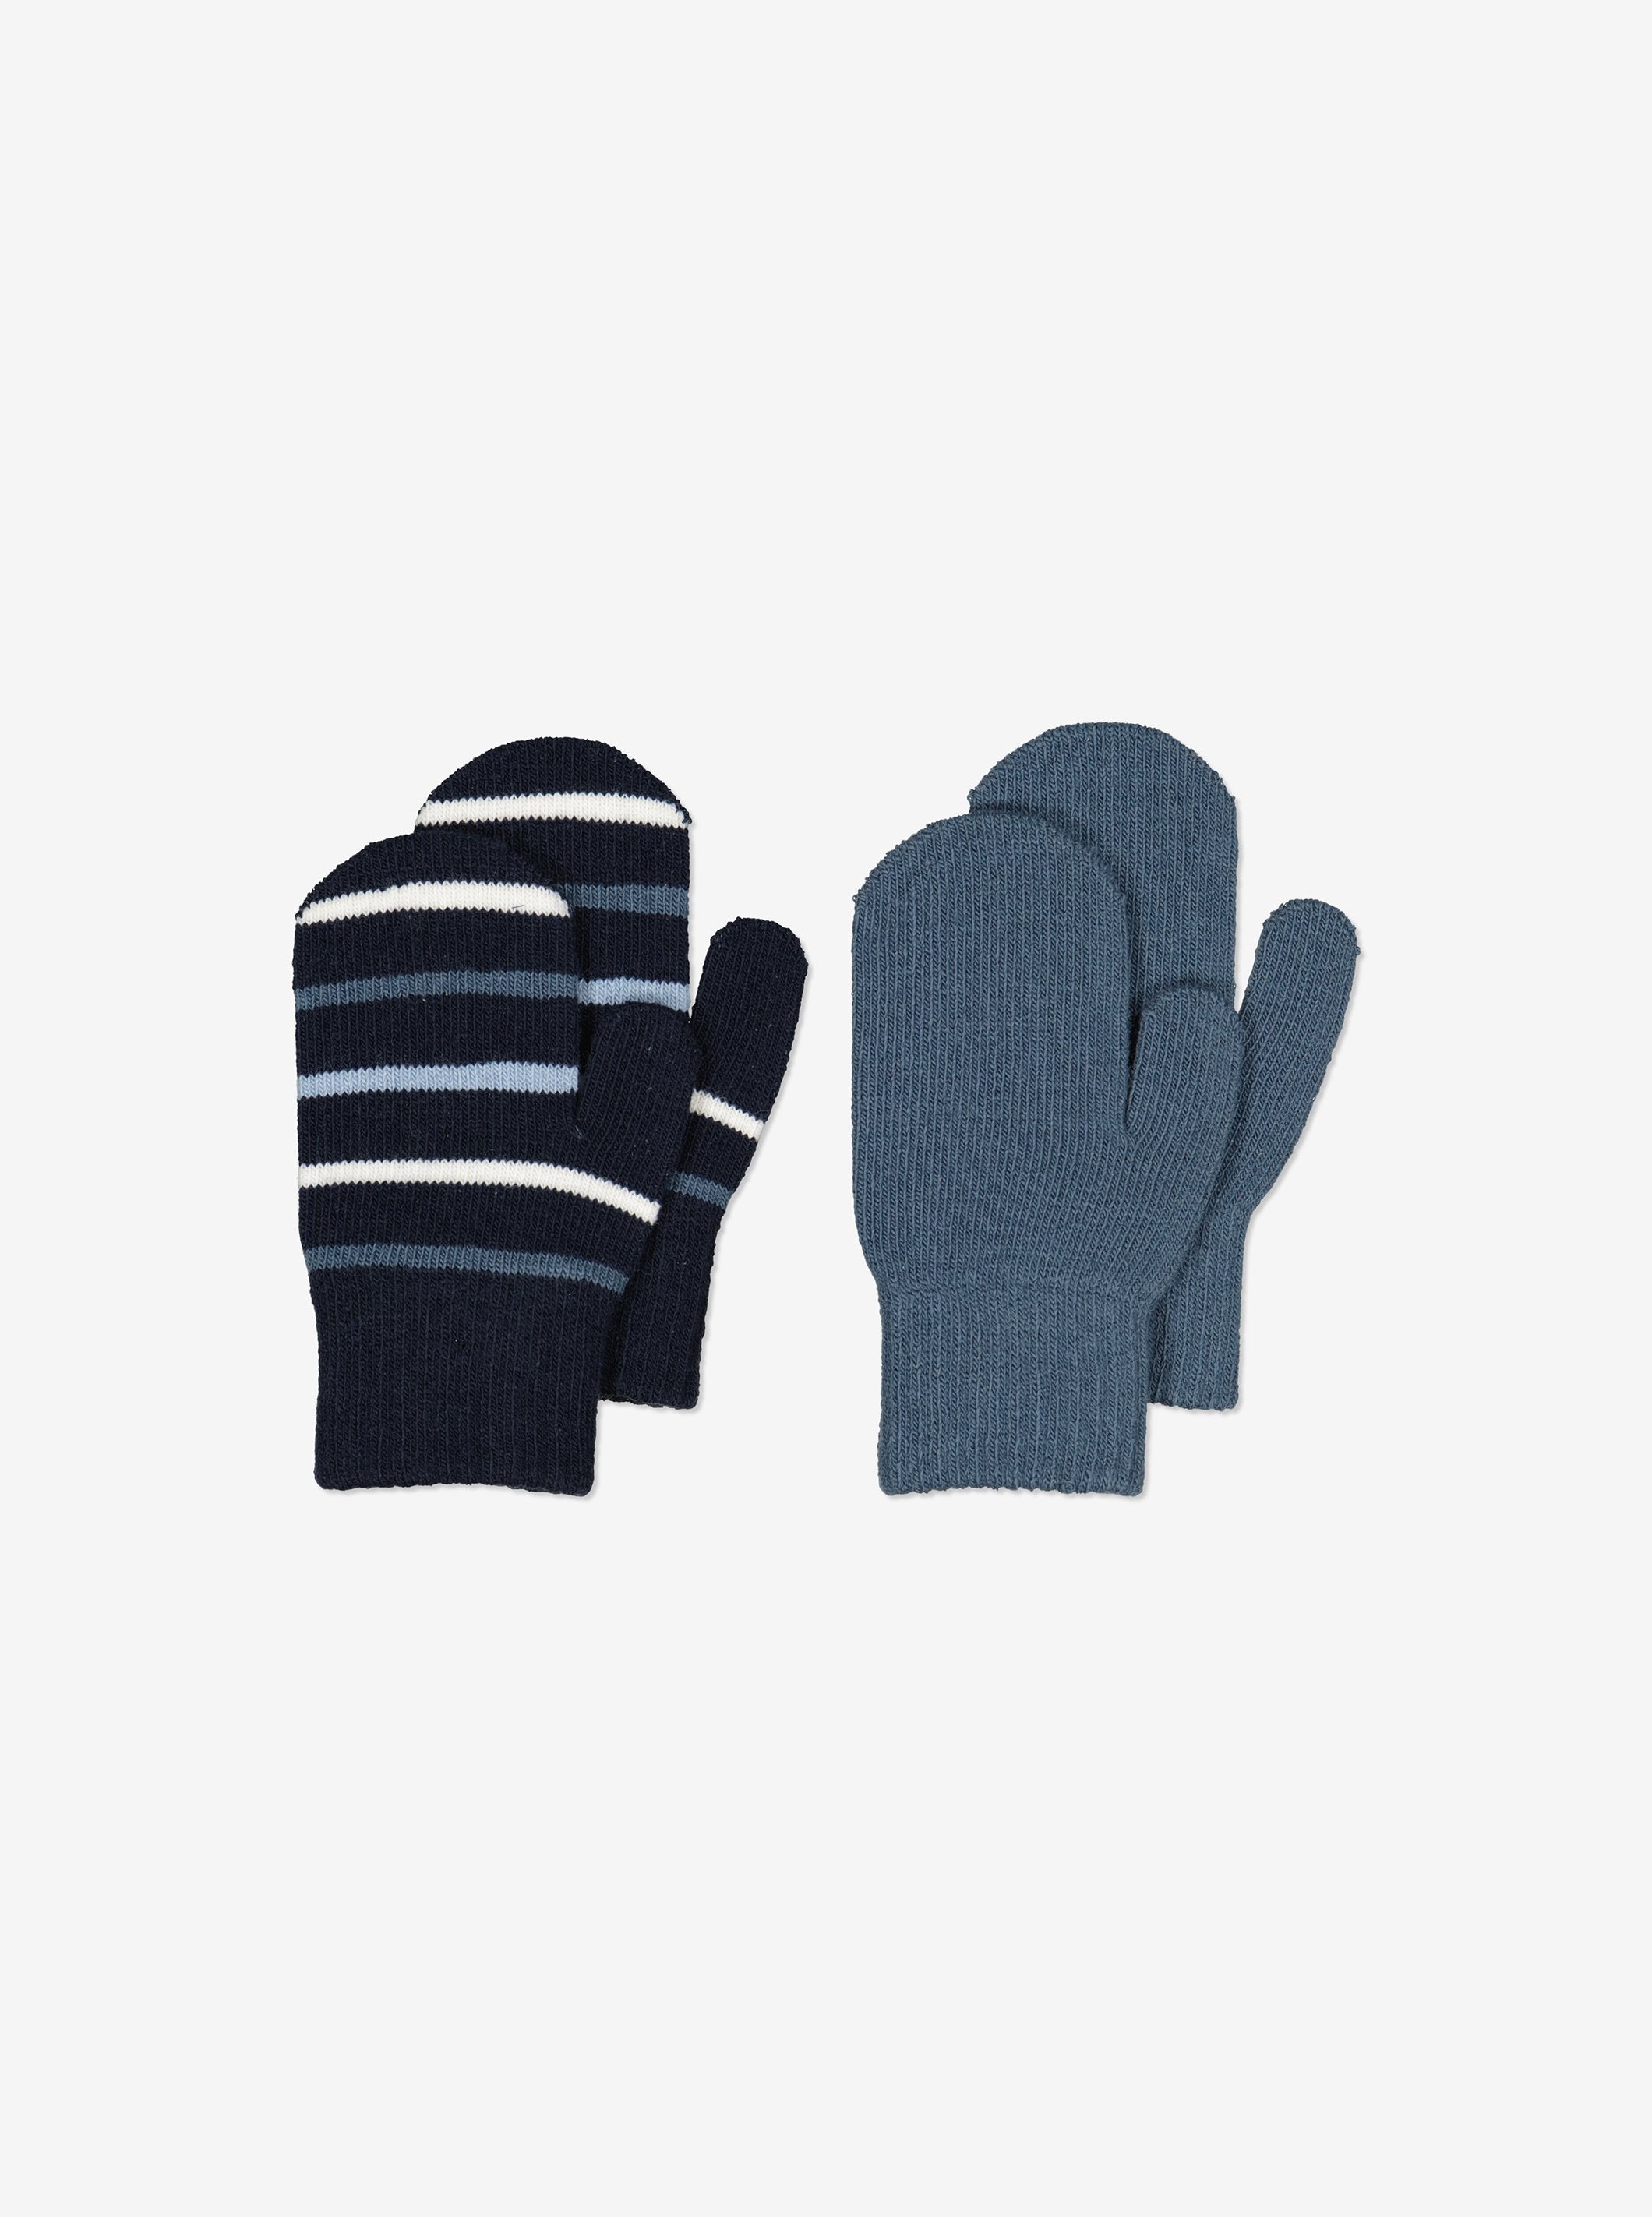 Polarn O. Pyret Two Pack Kids Magic Mittens Navy Unisex Age 6-48 Months